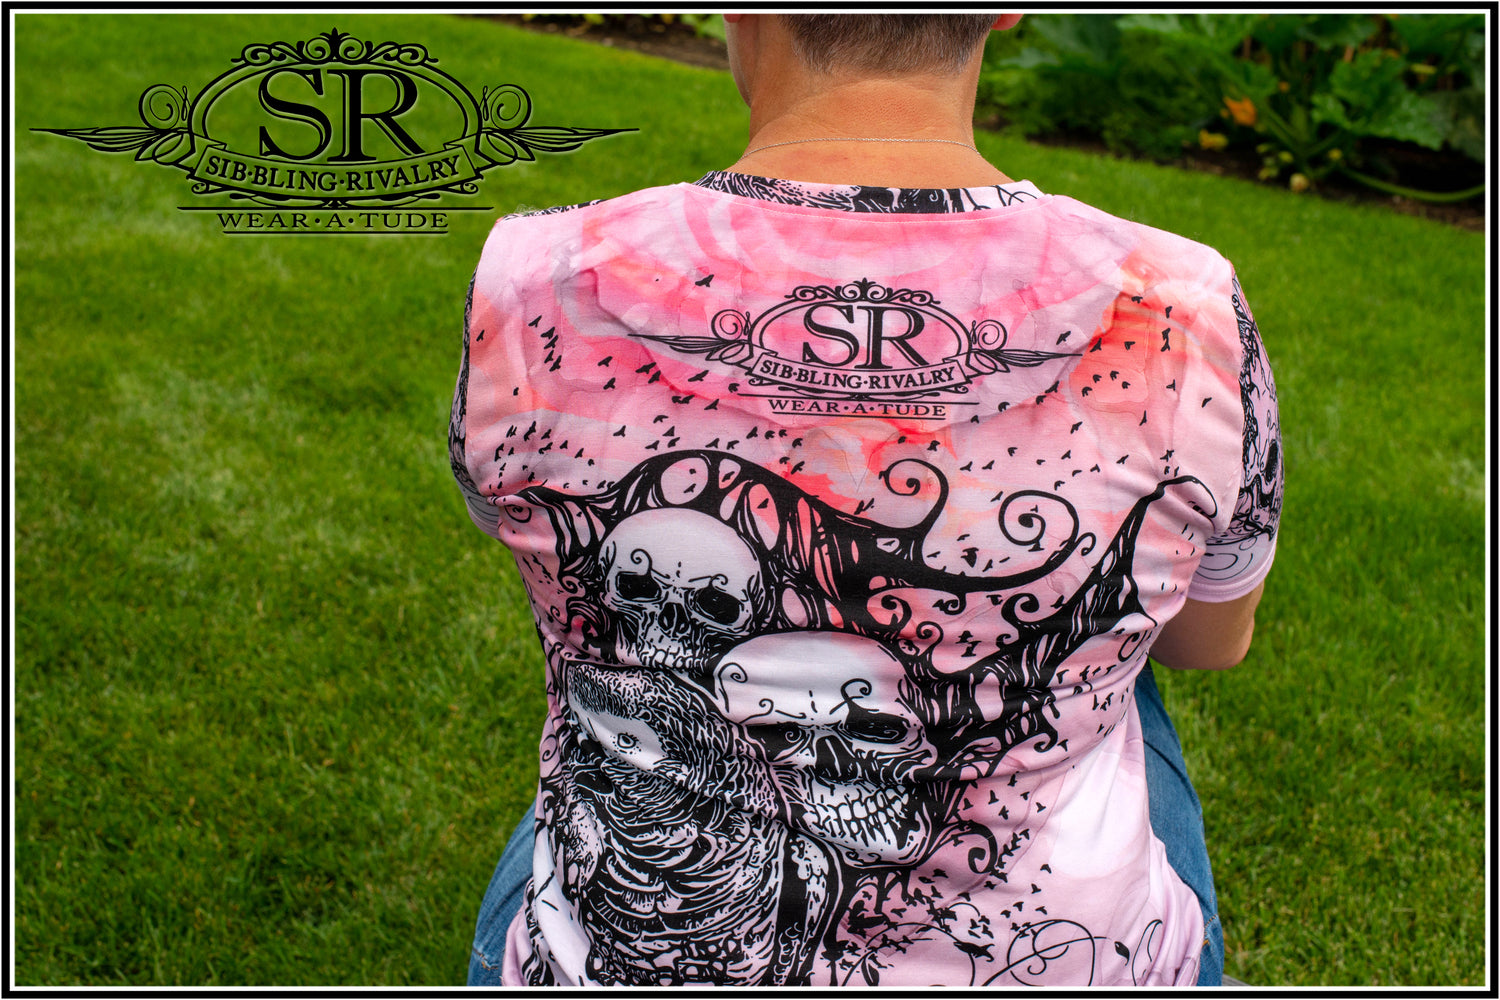 Good ol girl showing her bad side in this pink Grunge shirt made by SIB.BLING Rivalry. Get inked!